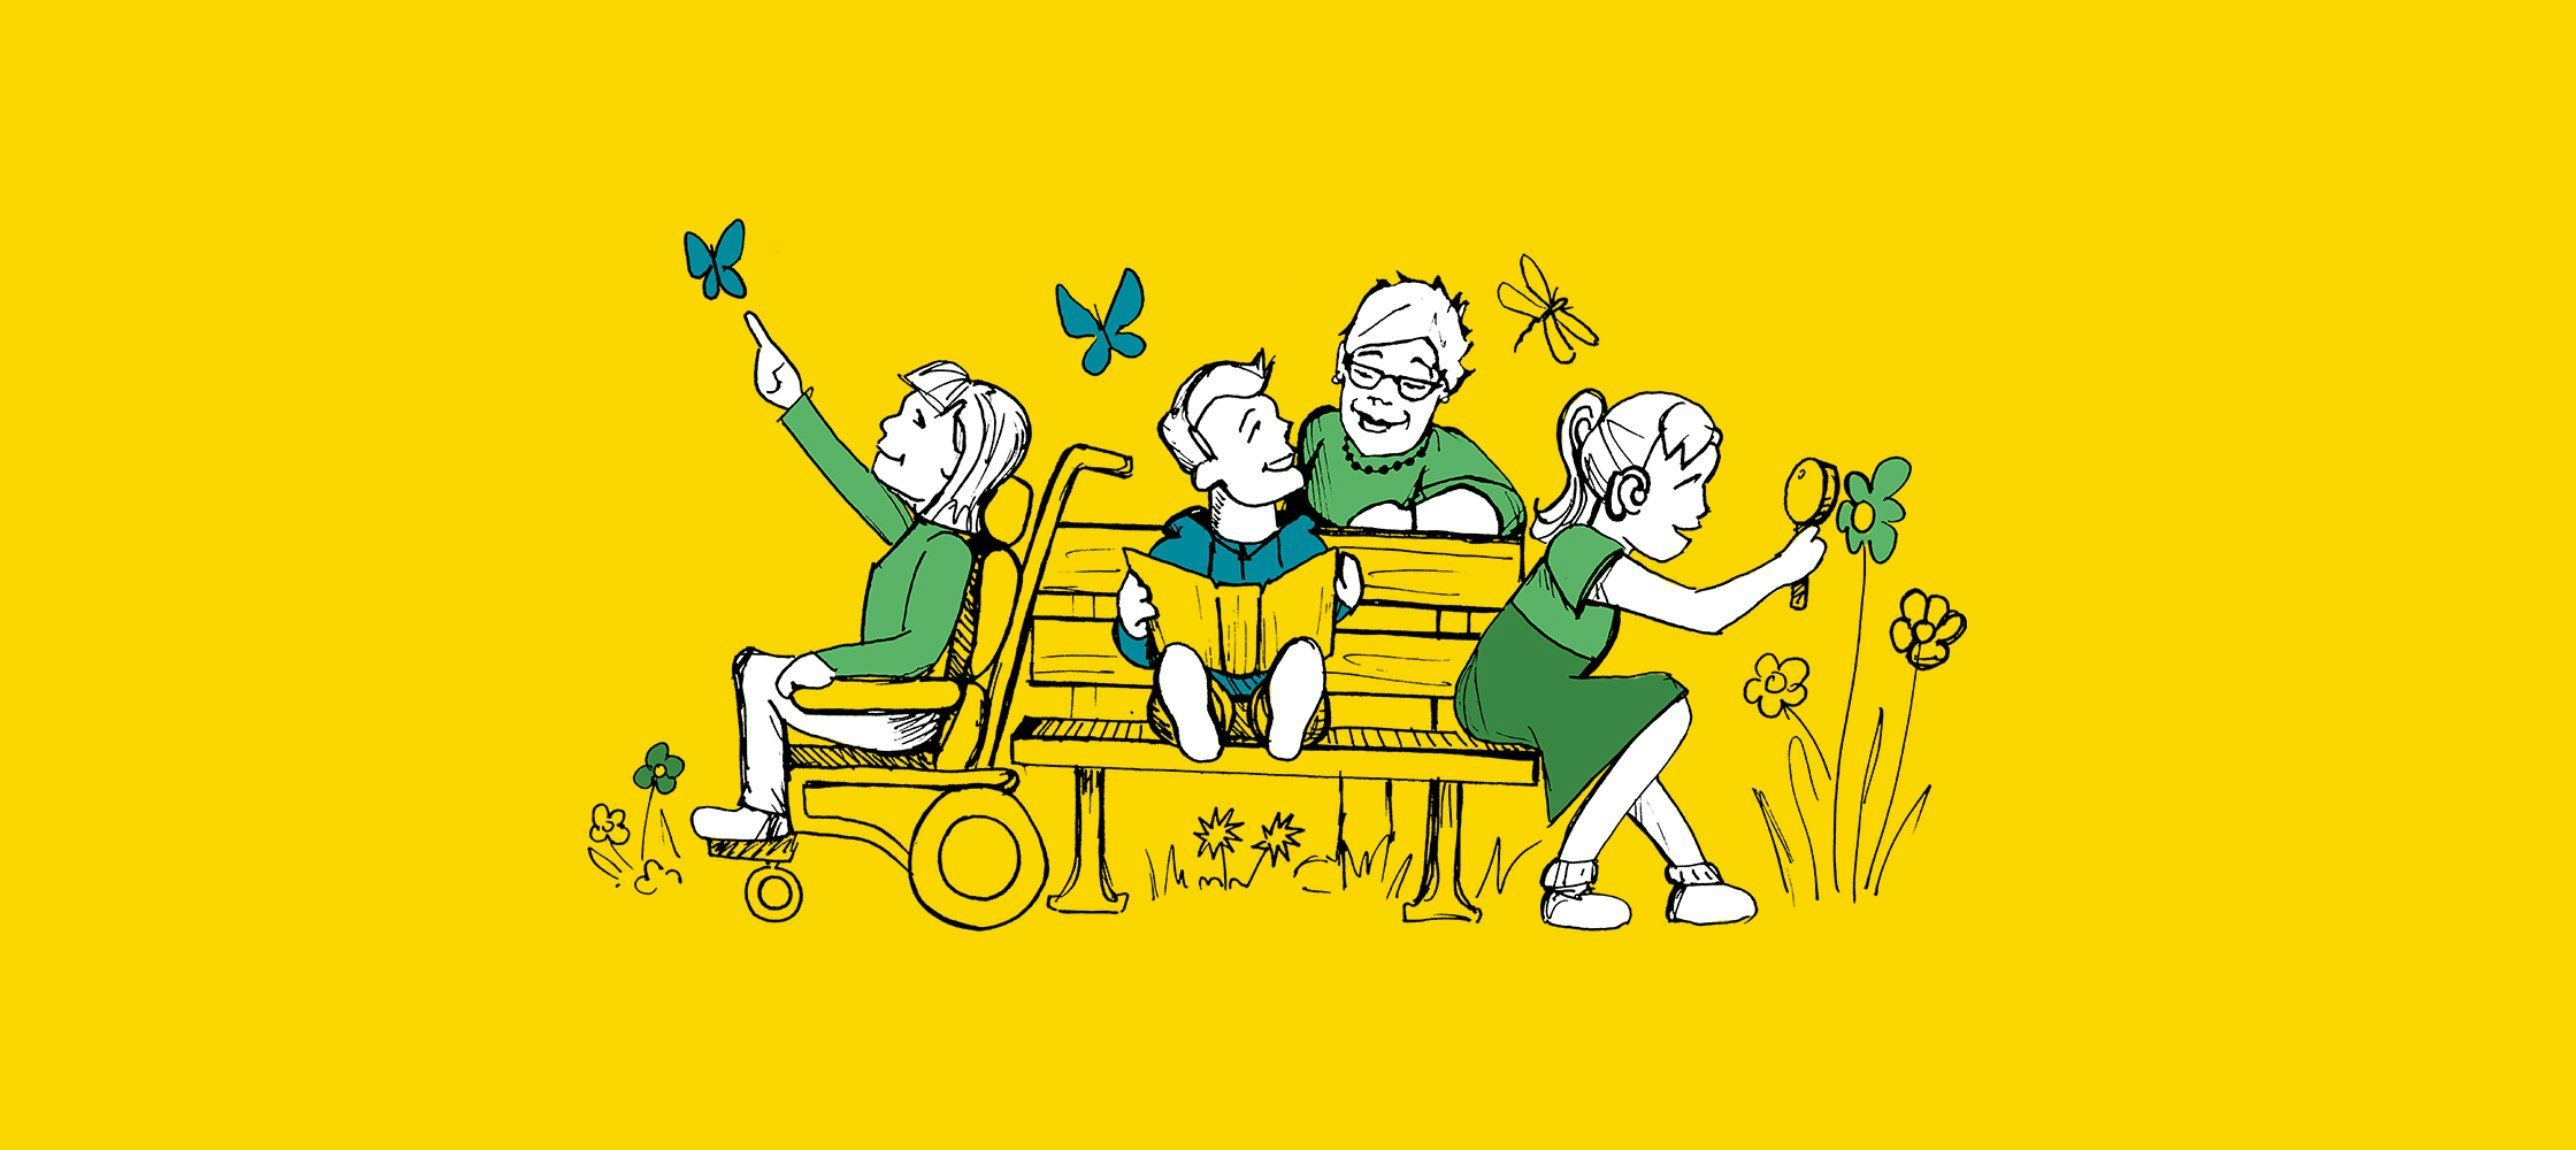 An illustration of children and a woman on a bench.